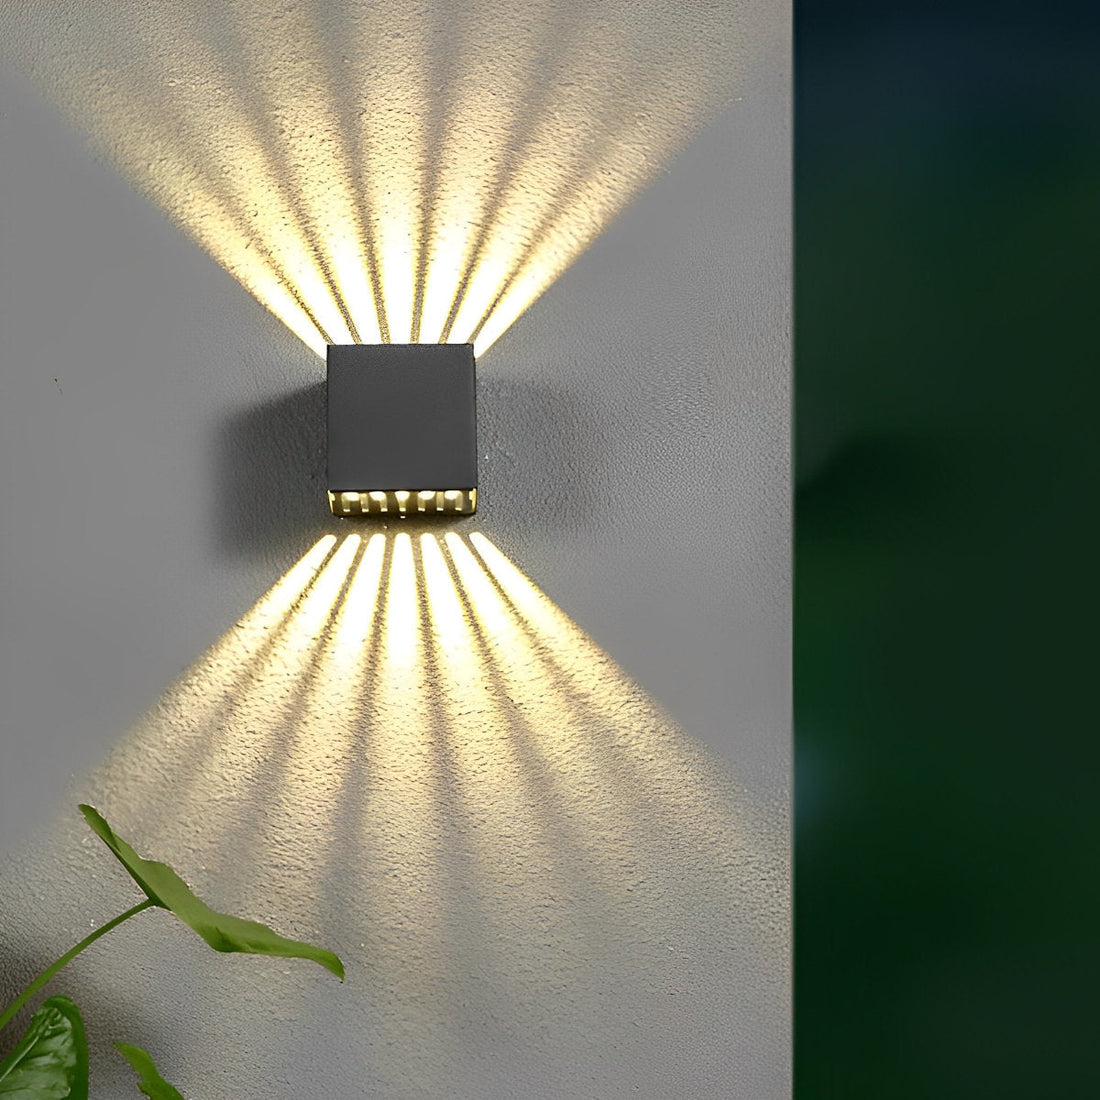 Creative Waterproof Nordic Style 6 Led Solar Up Down Wall Lights - Flyachilles